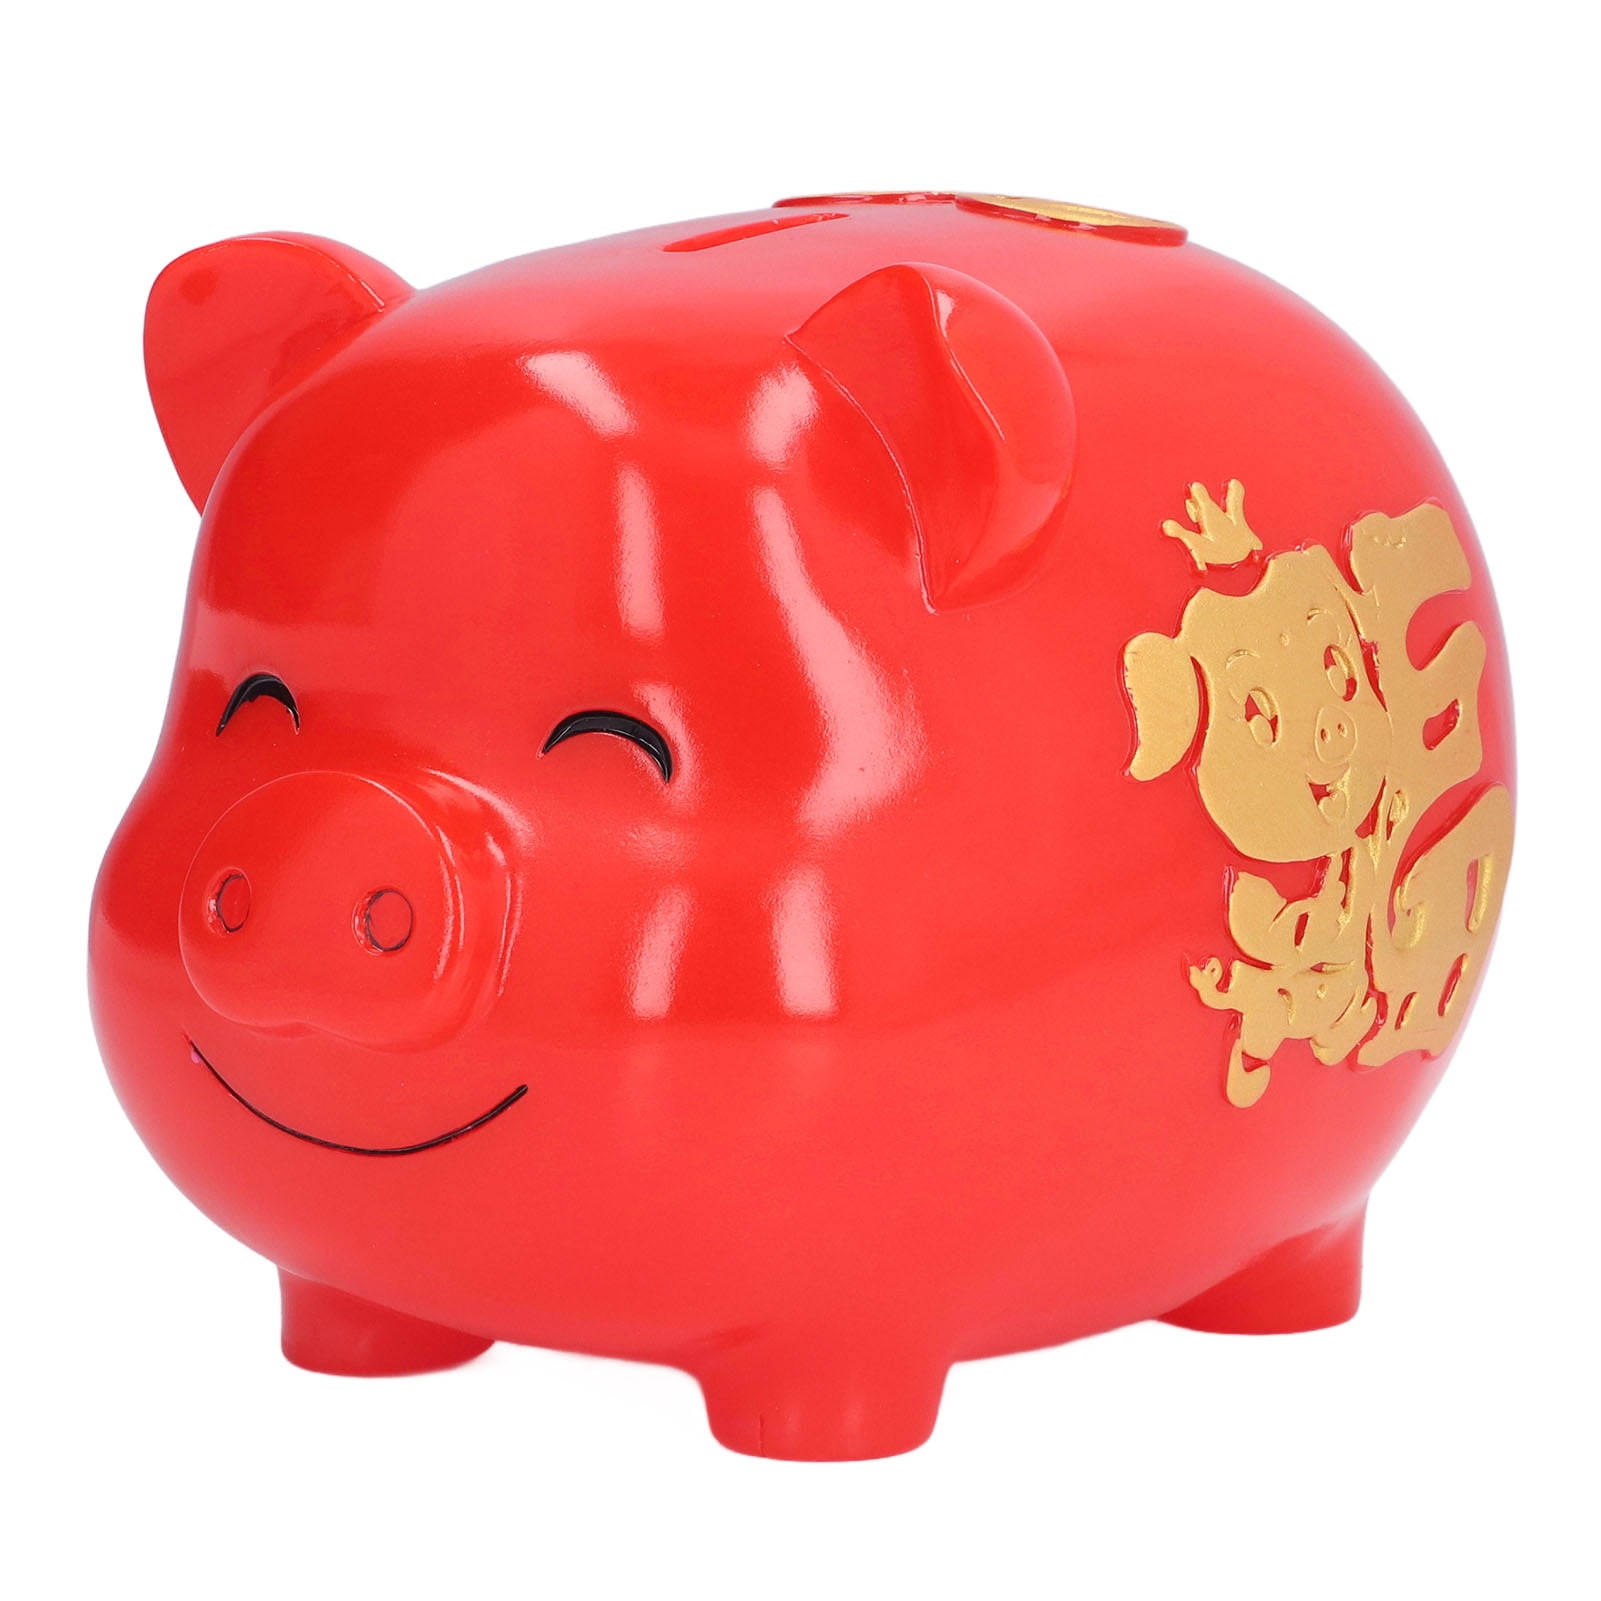 Raap bladeren op Philadelphia Tub Bank, Adorable Cute Full Clear Color Pig Money Box For Gift For Home  Decoration For Coins Storage Small Size Red - Walmart.com